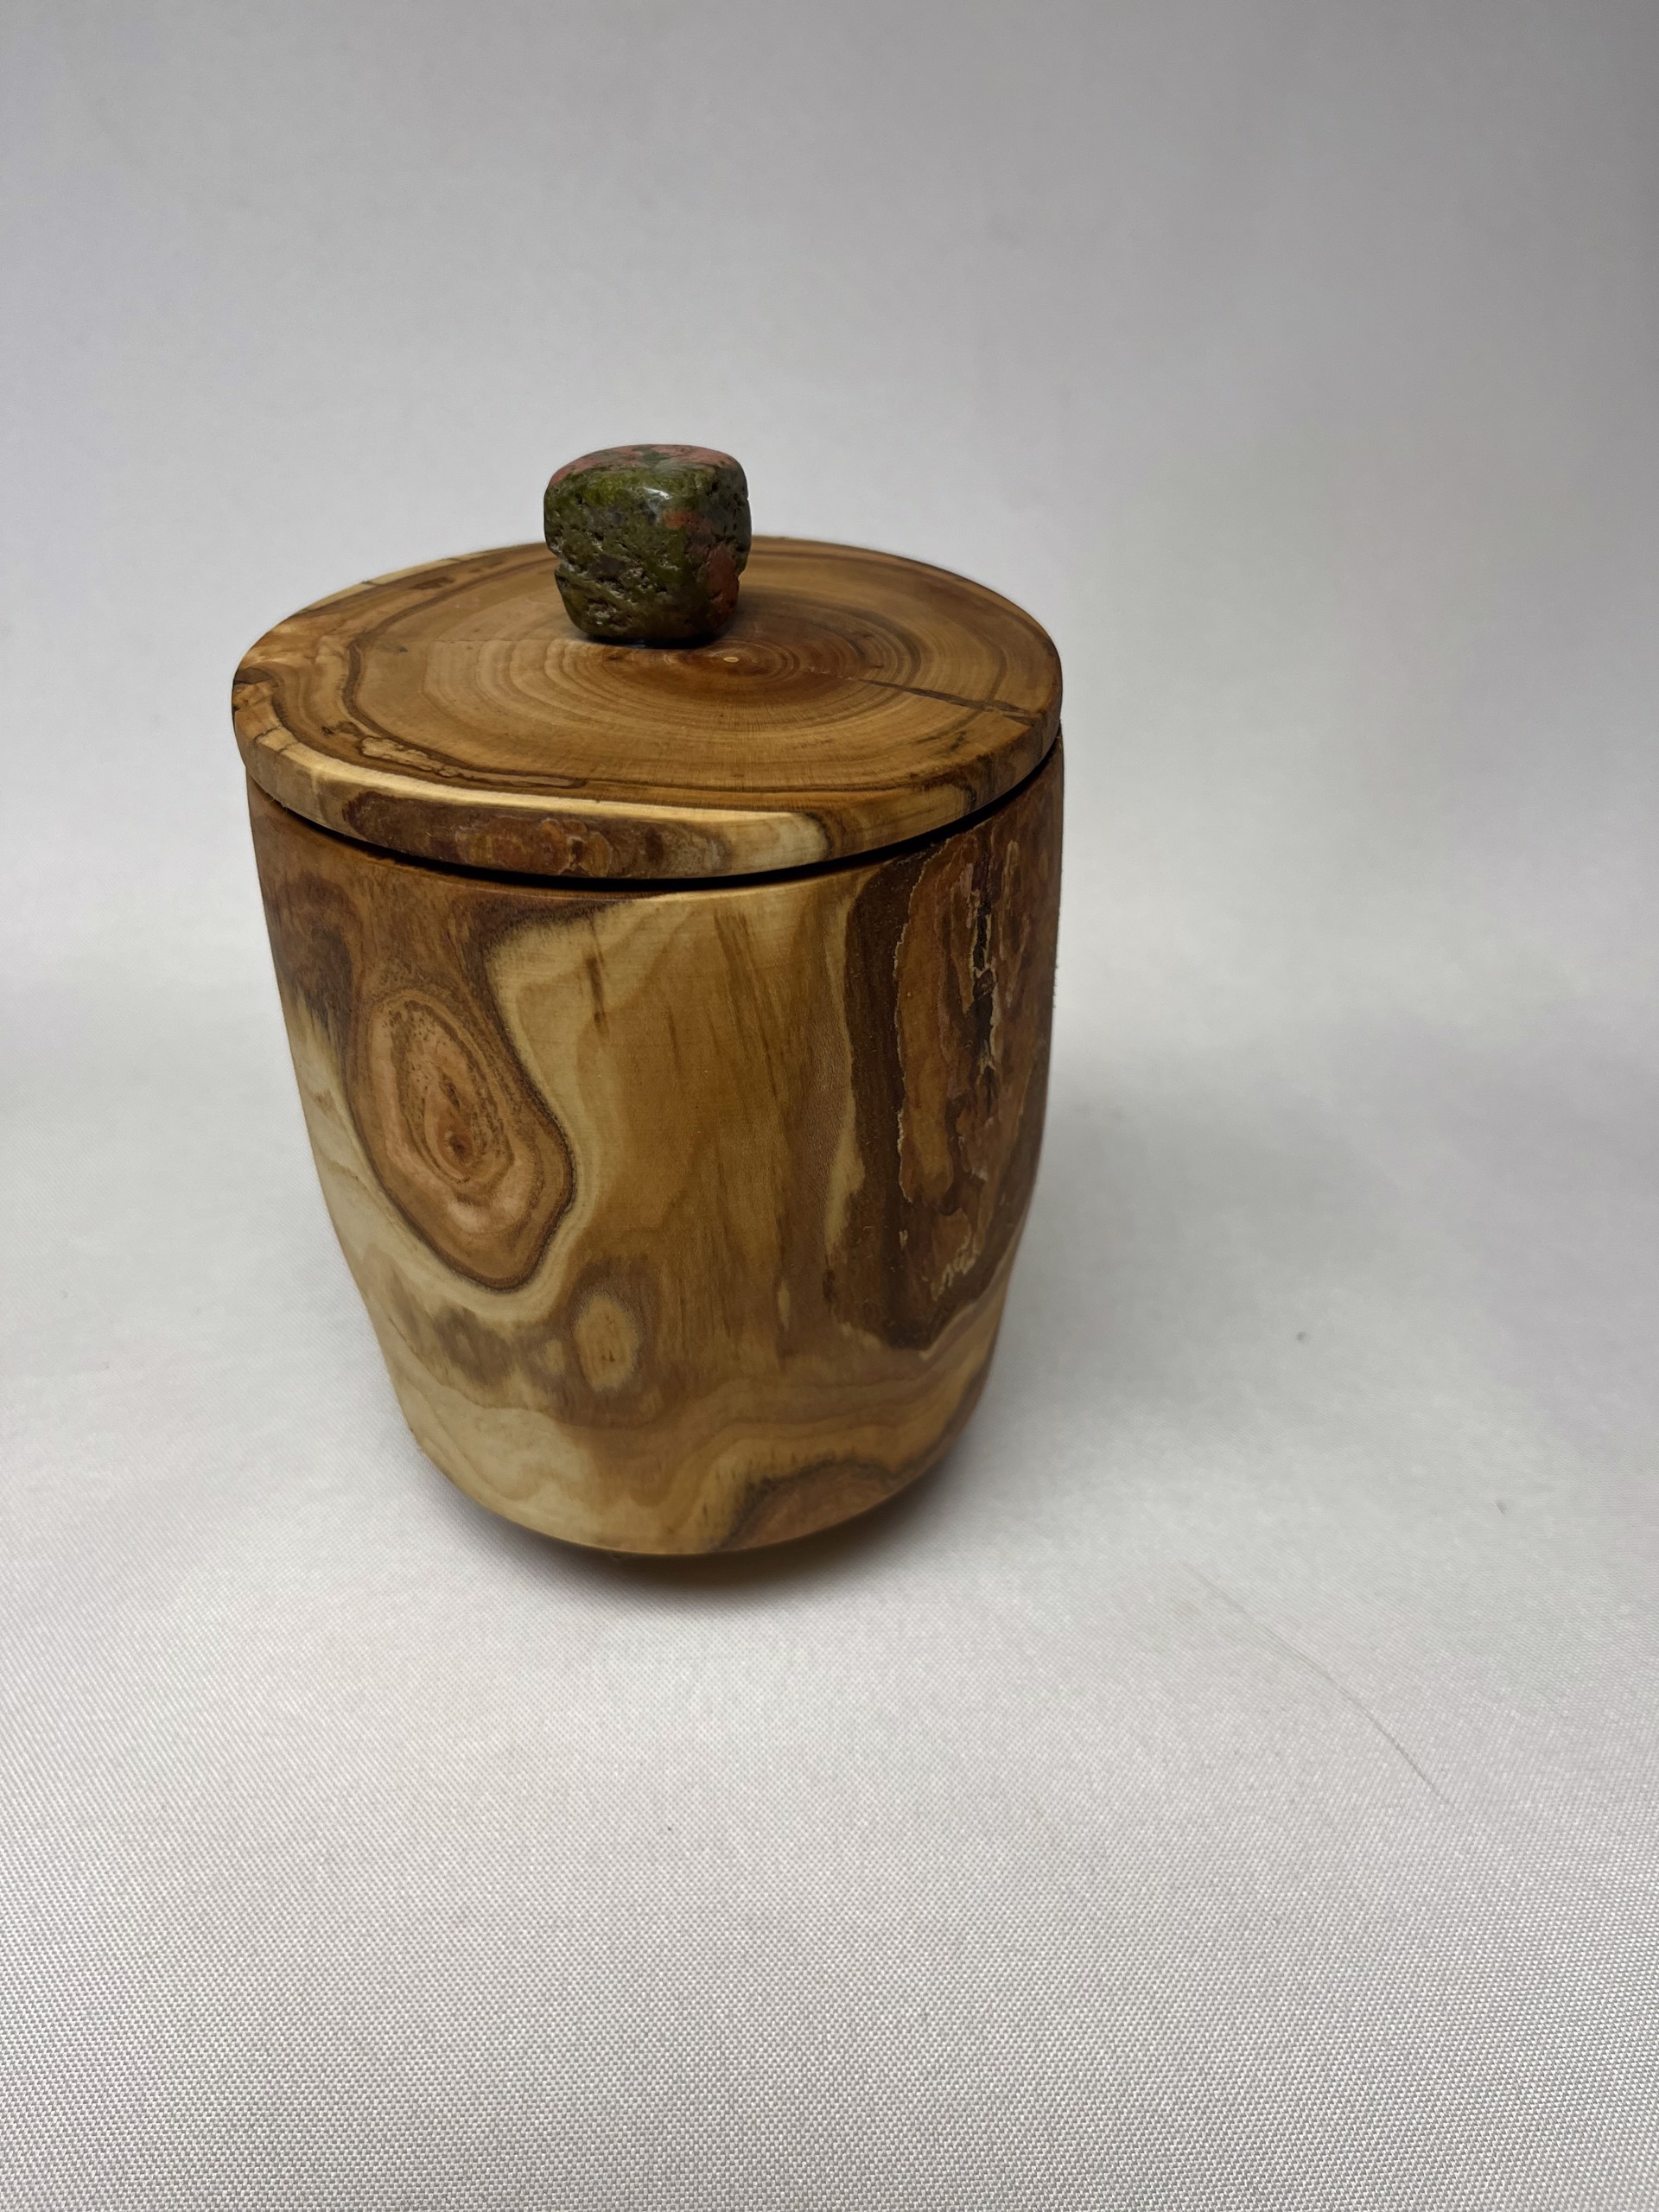 Turned Wood Jar W/Lid 23-51 by Rick Squires